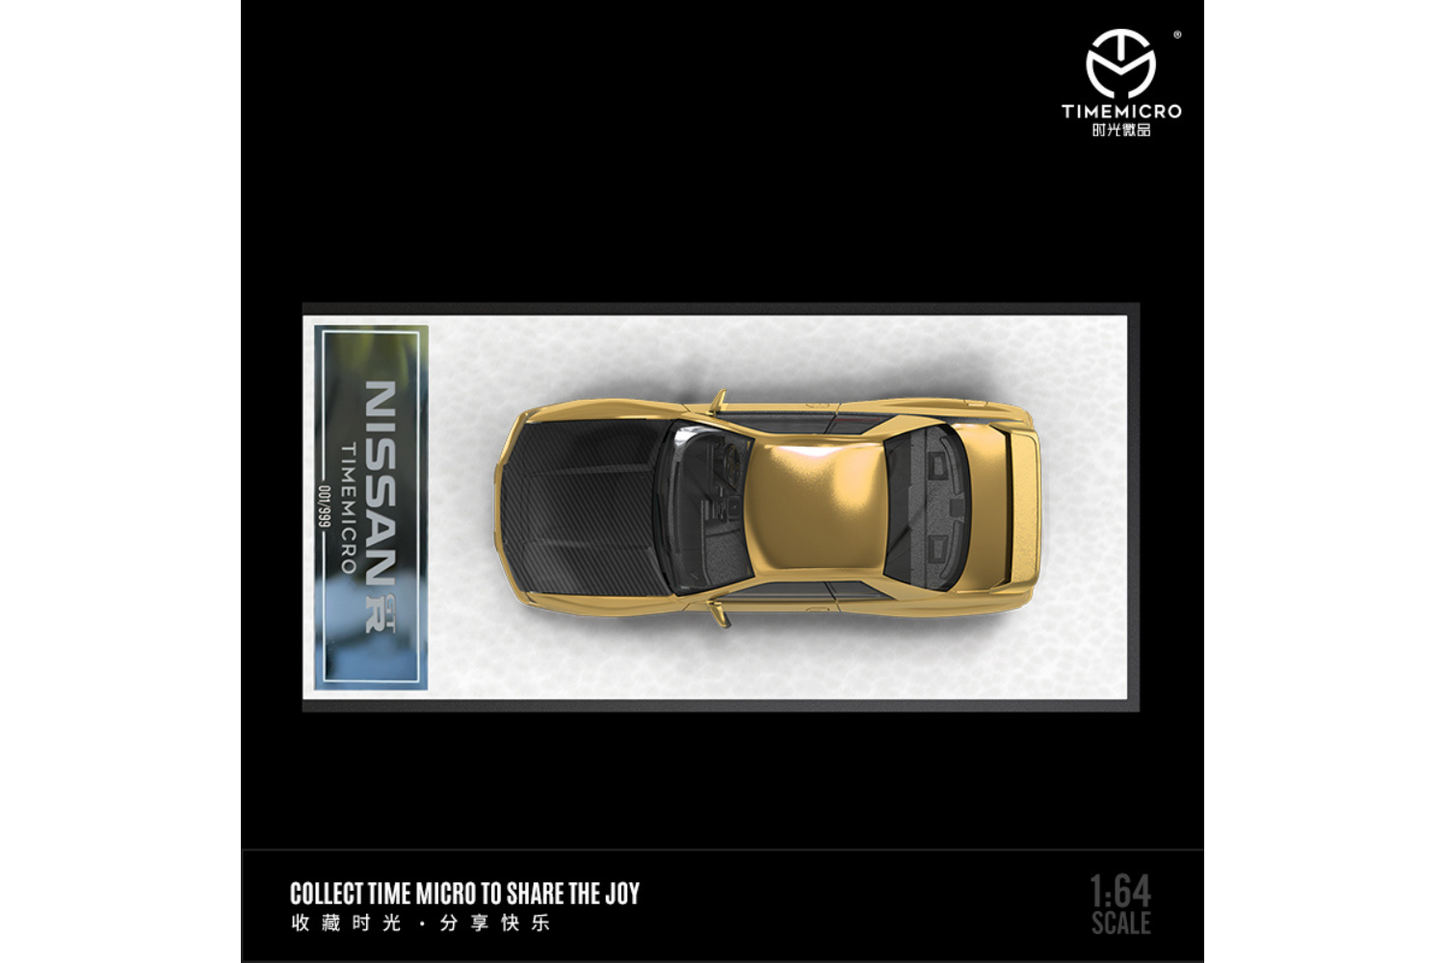 Time Micro 1/64 Nissan Skyline GT-R (R32) In Gold